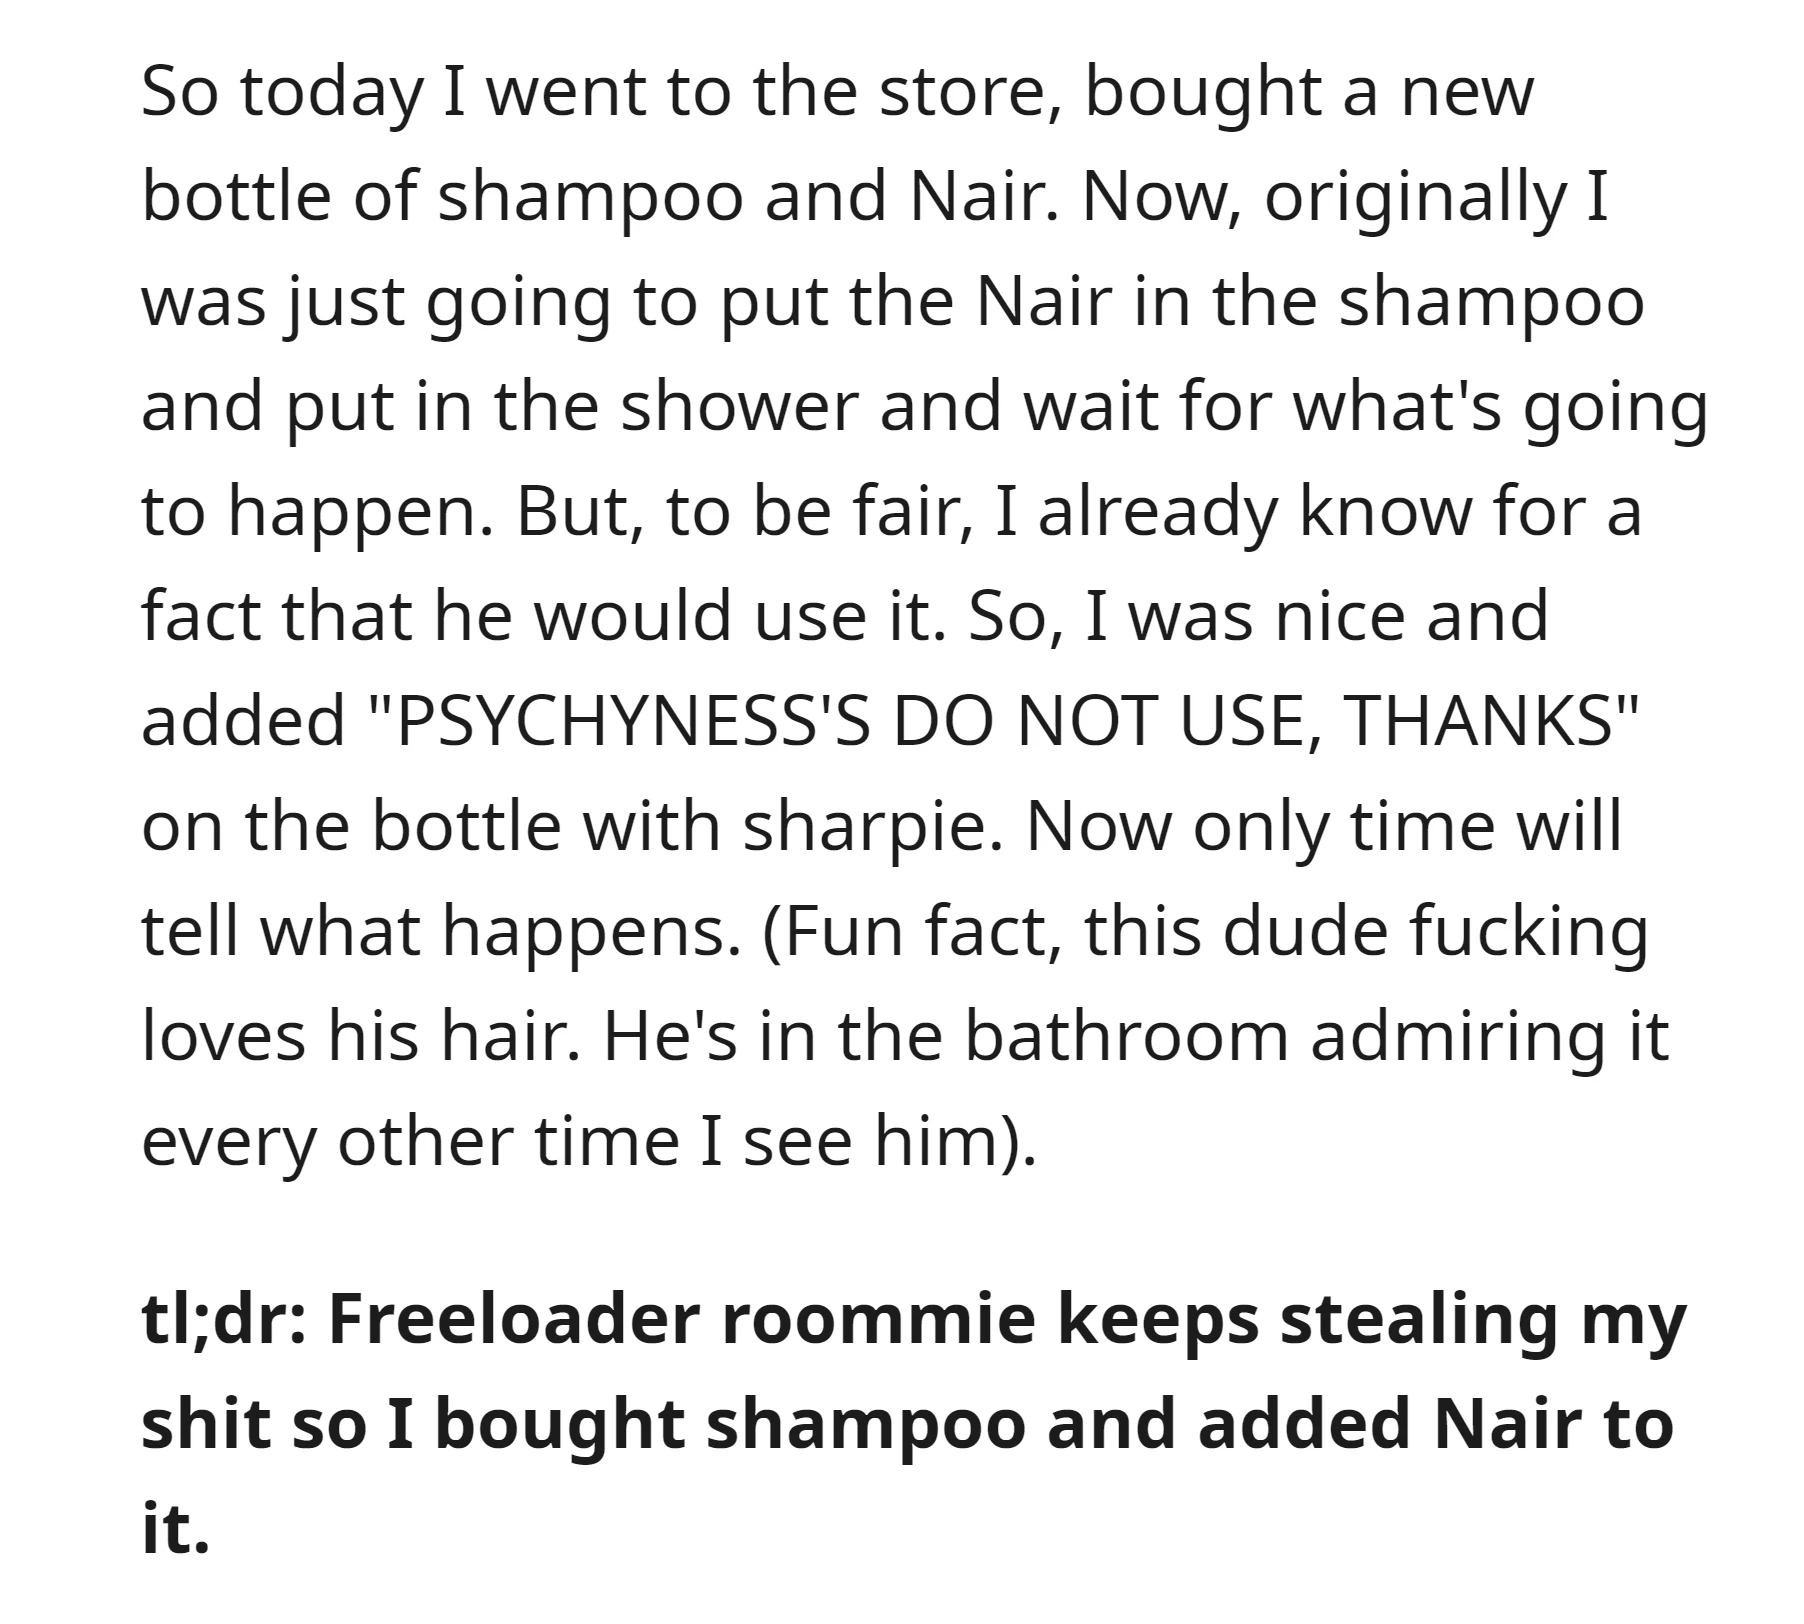 OP did a prank on him by mixing Nair with shampoo and leaving a warning note